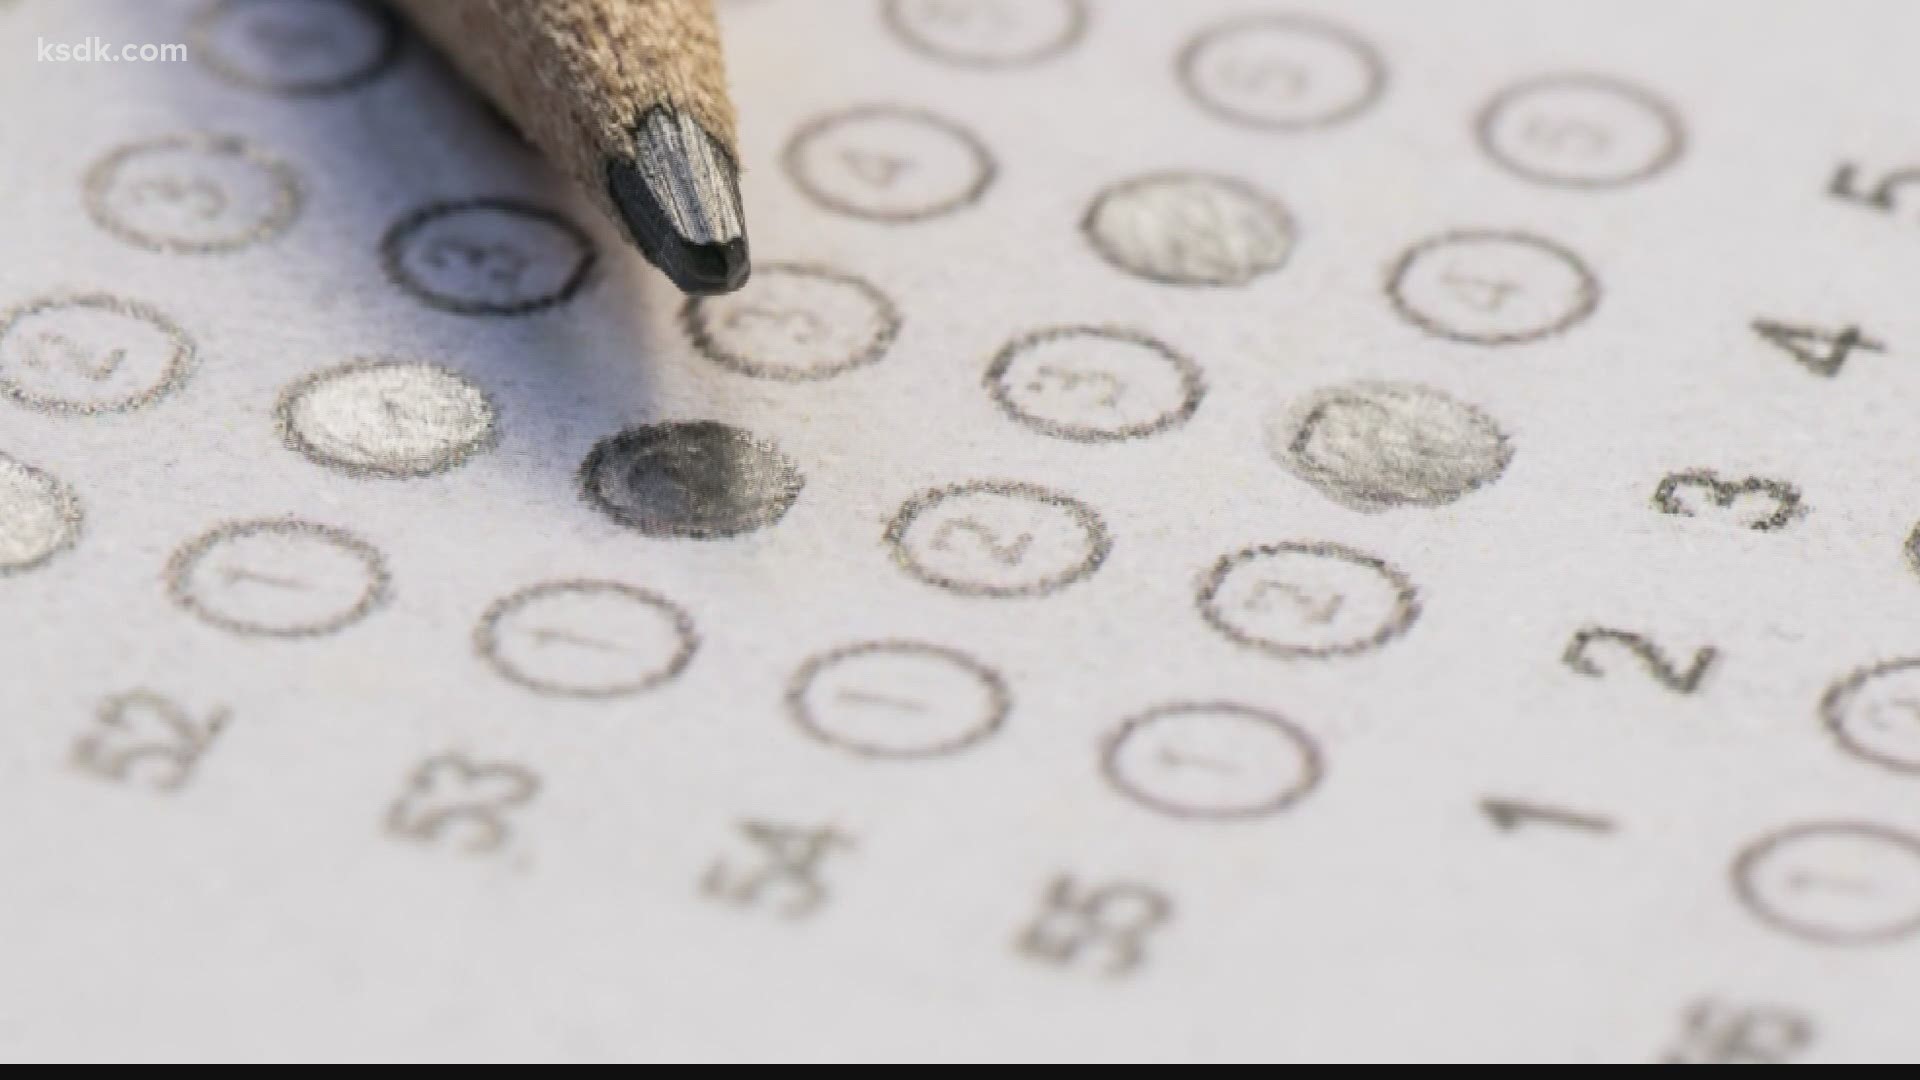 Starting this month, school districts across the country begin administering federally mandated standardized tests.